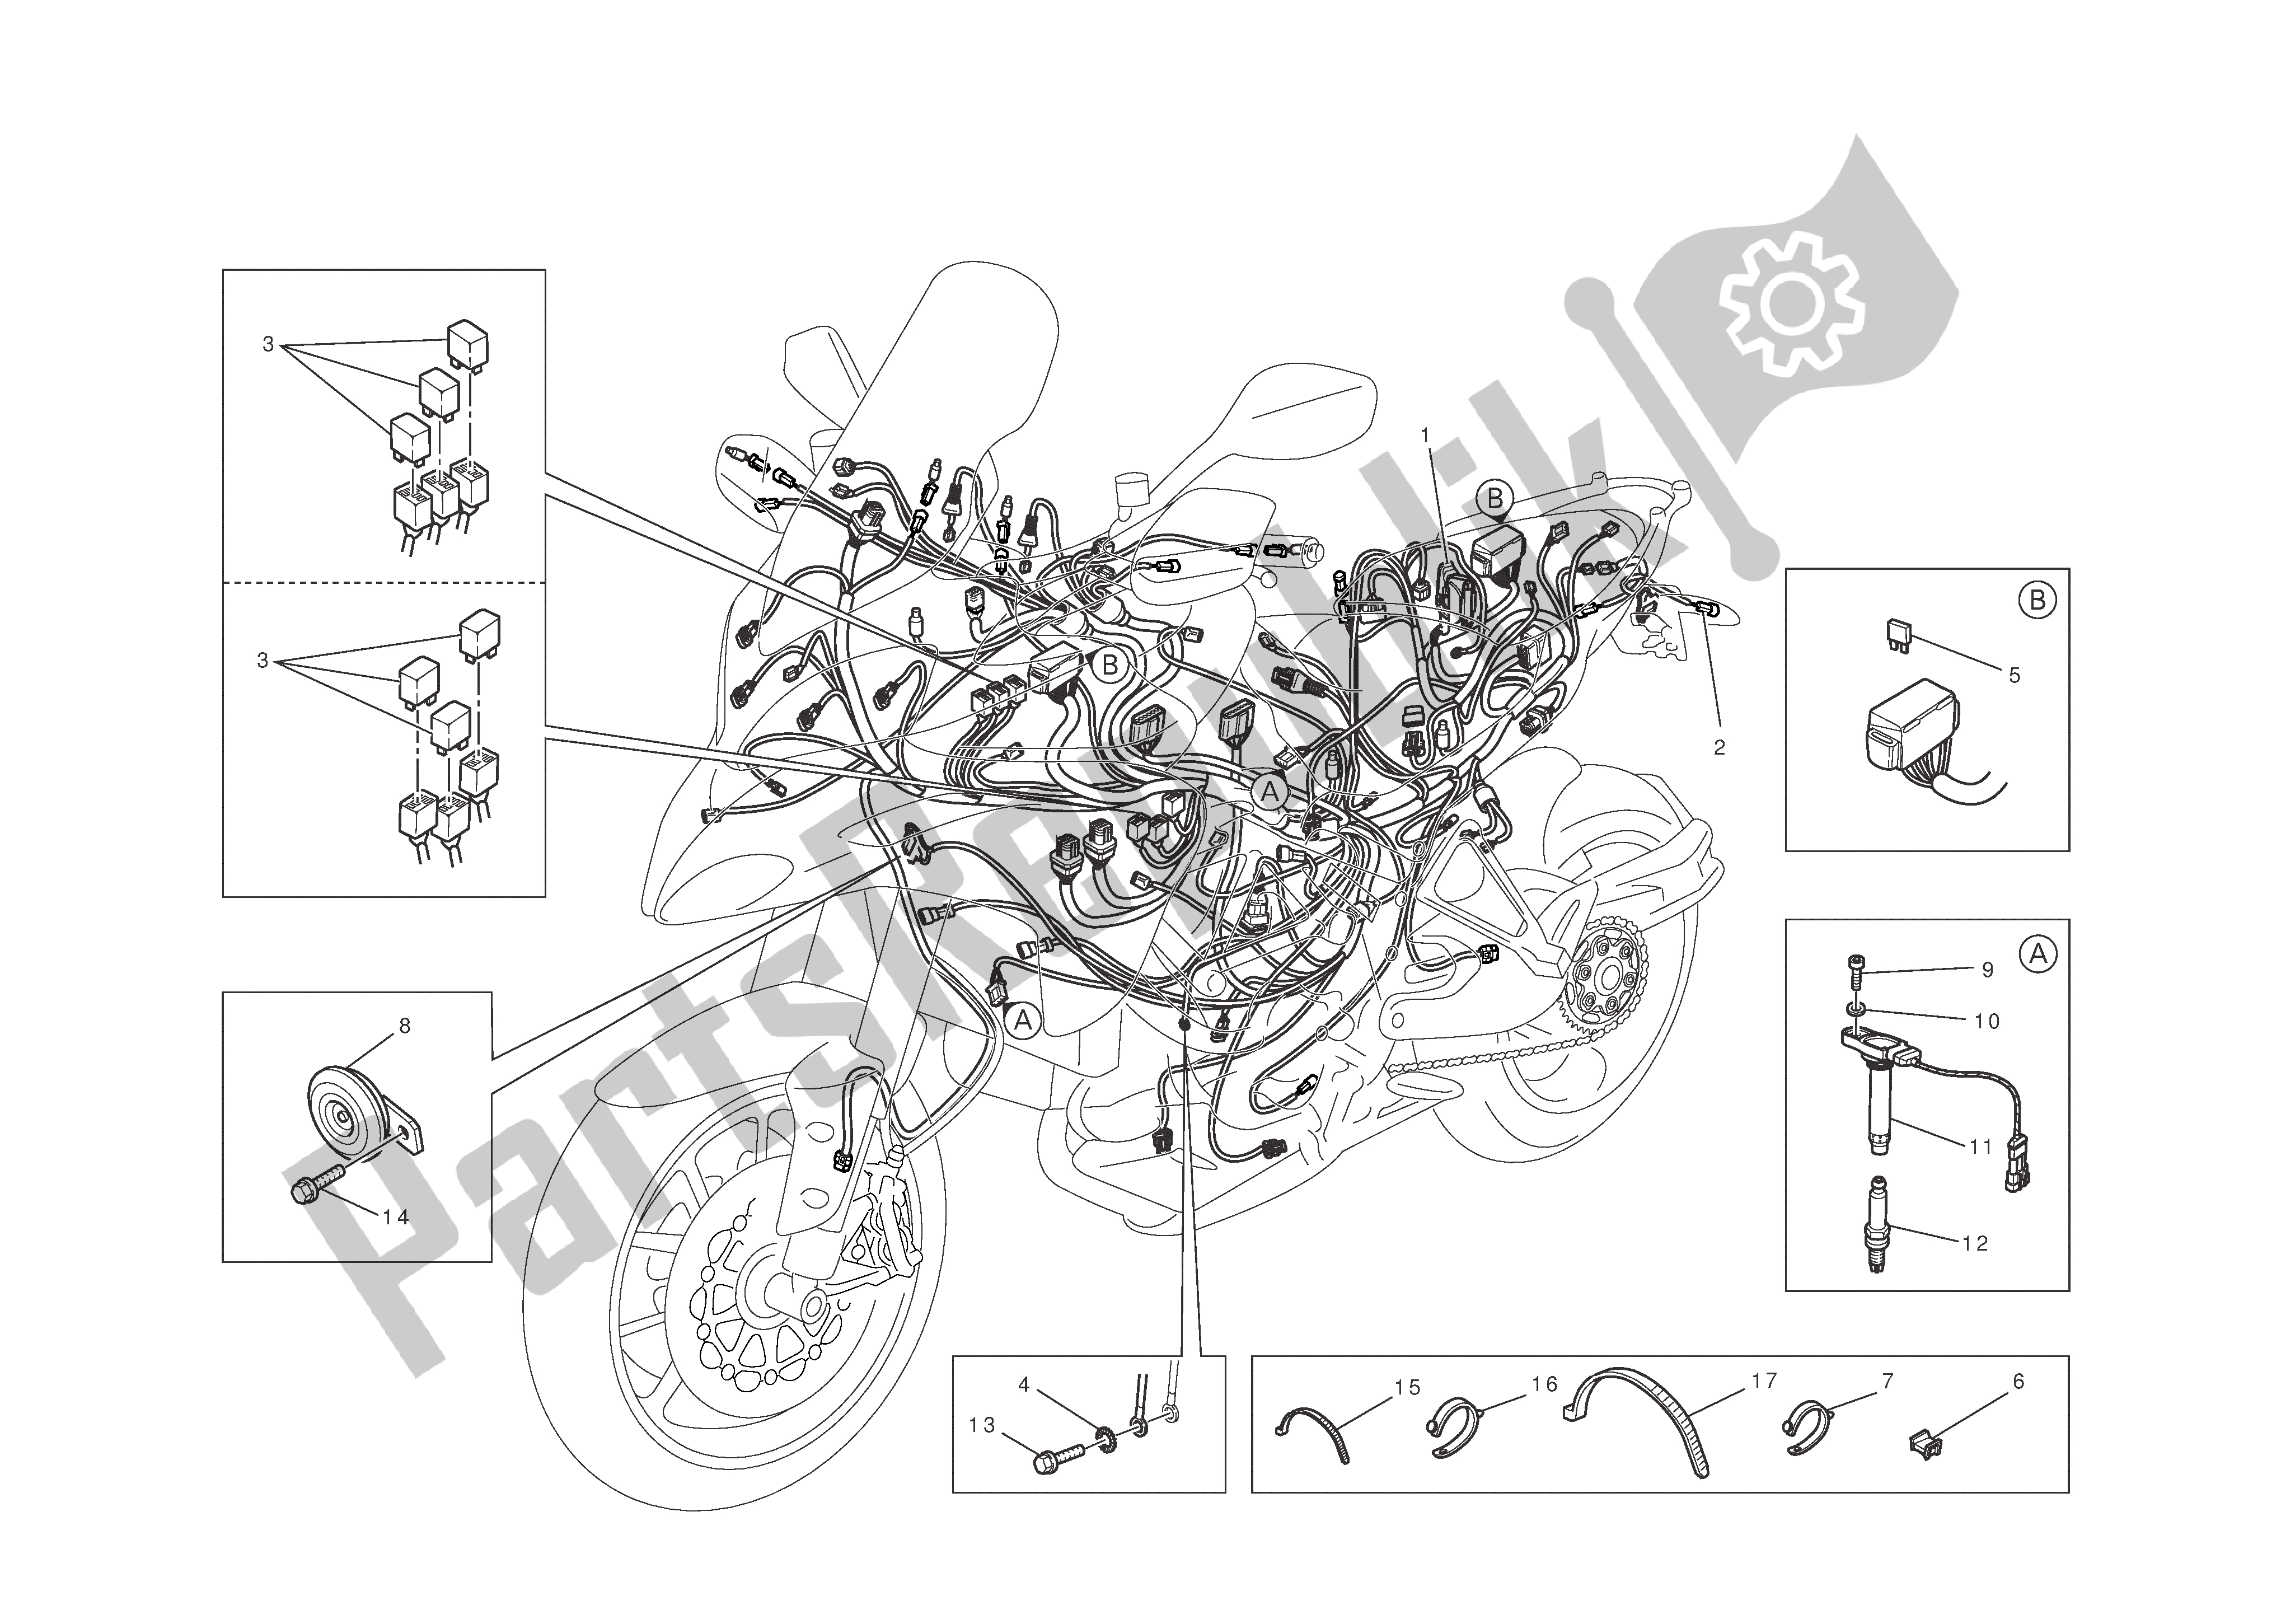 All parts for the Electrical System of the Ducati Multistrada T ABS 1200 2010